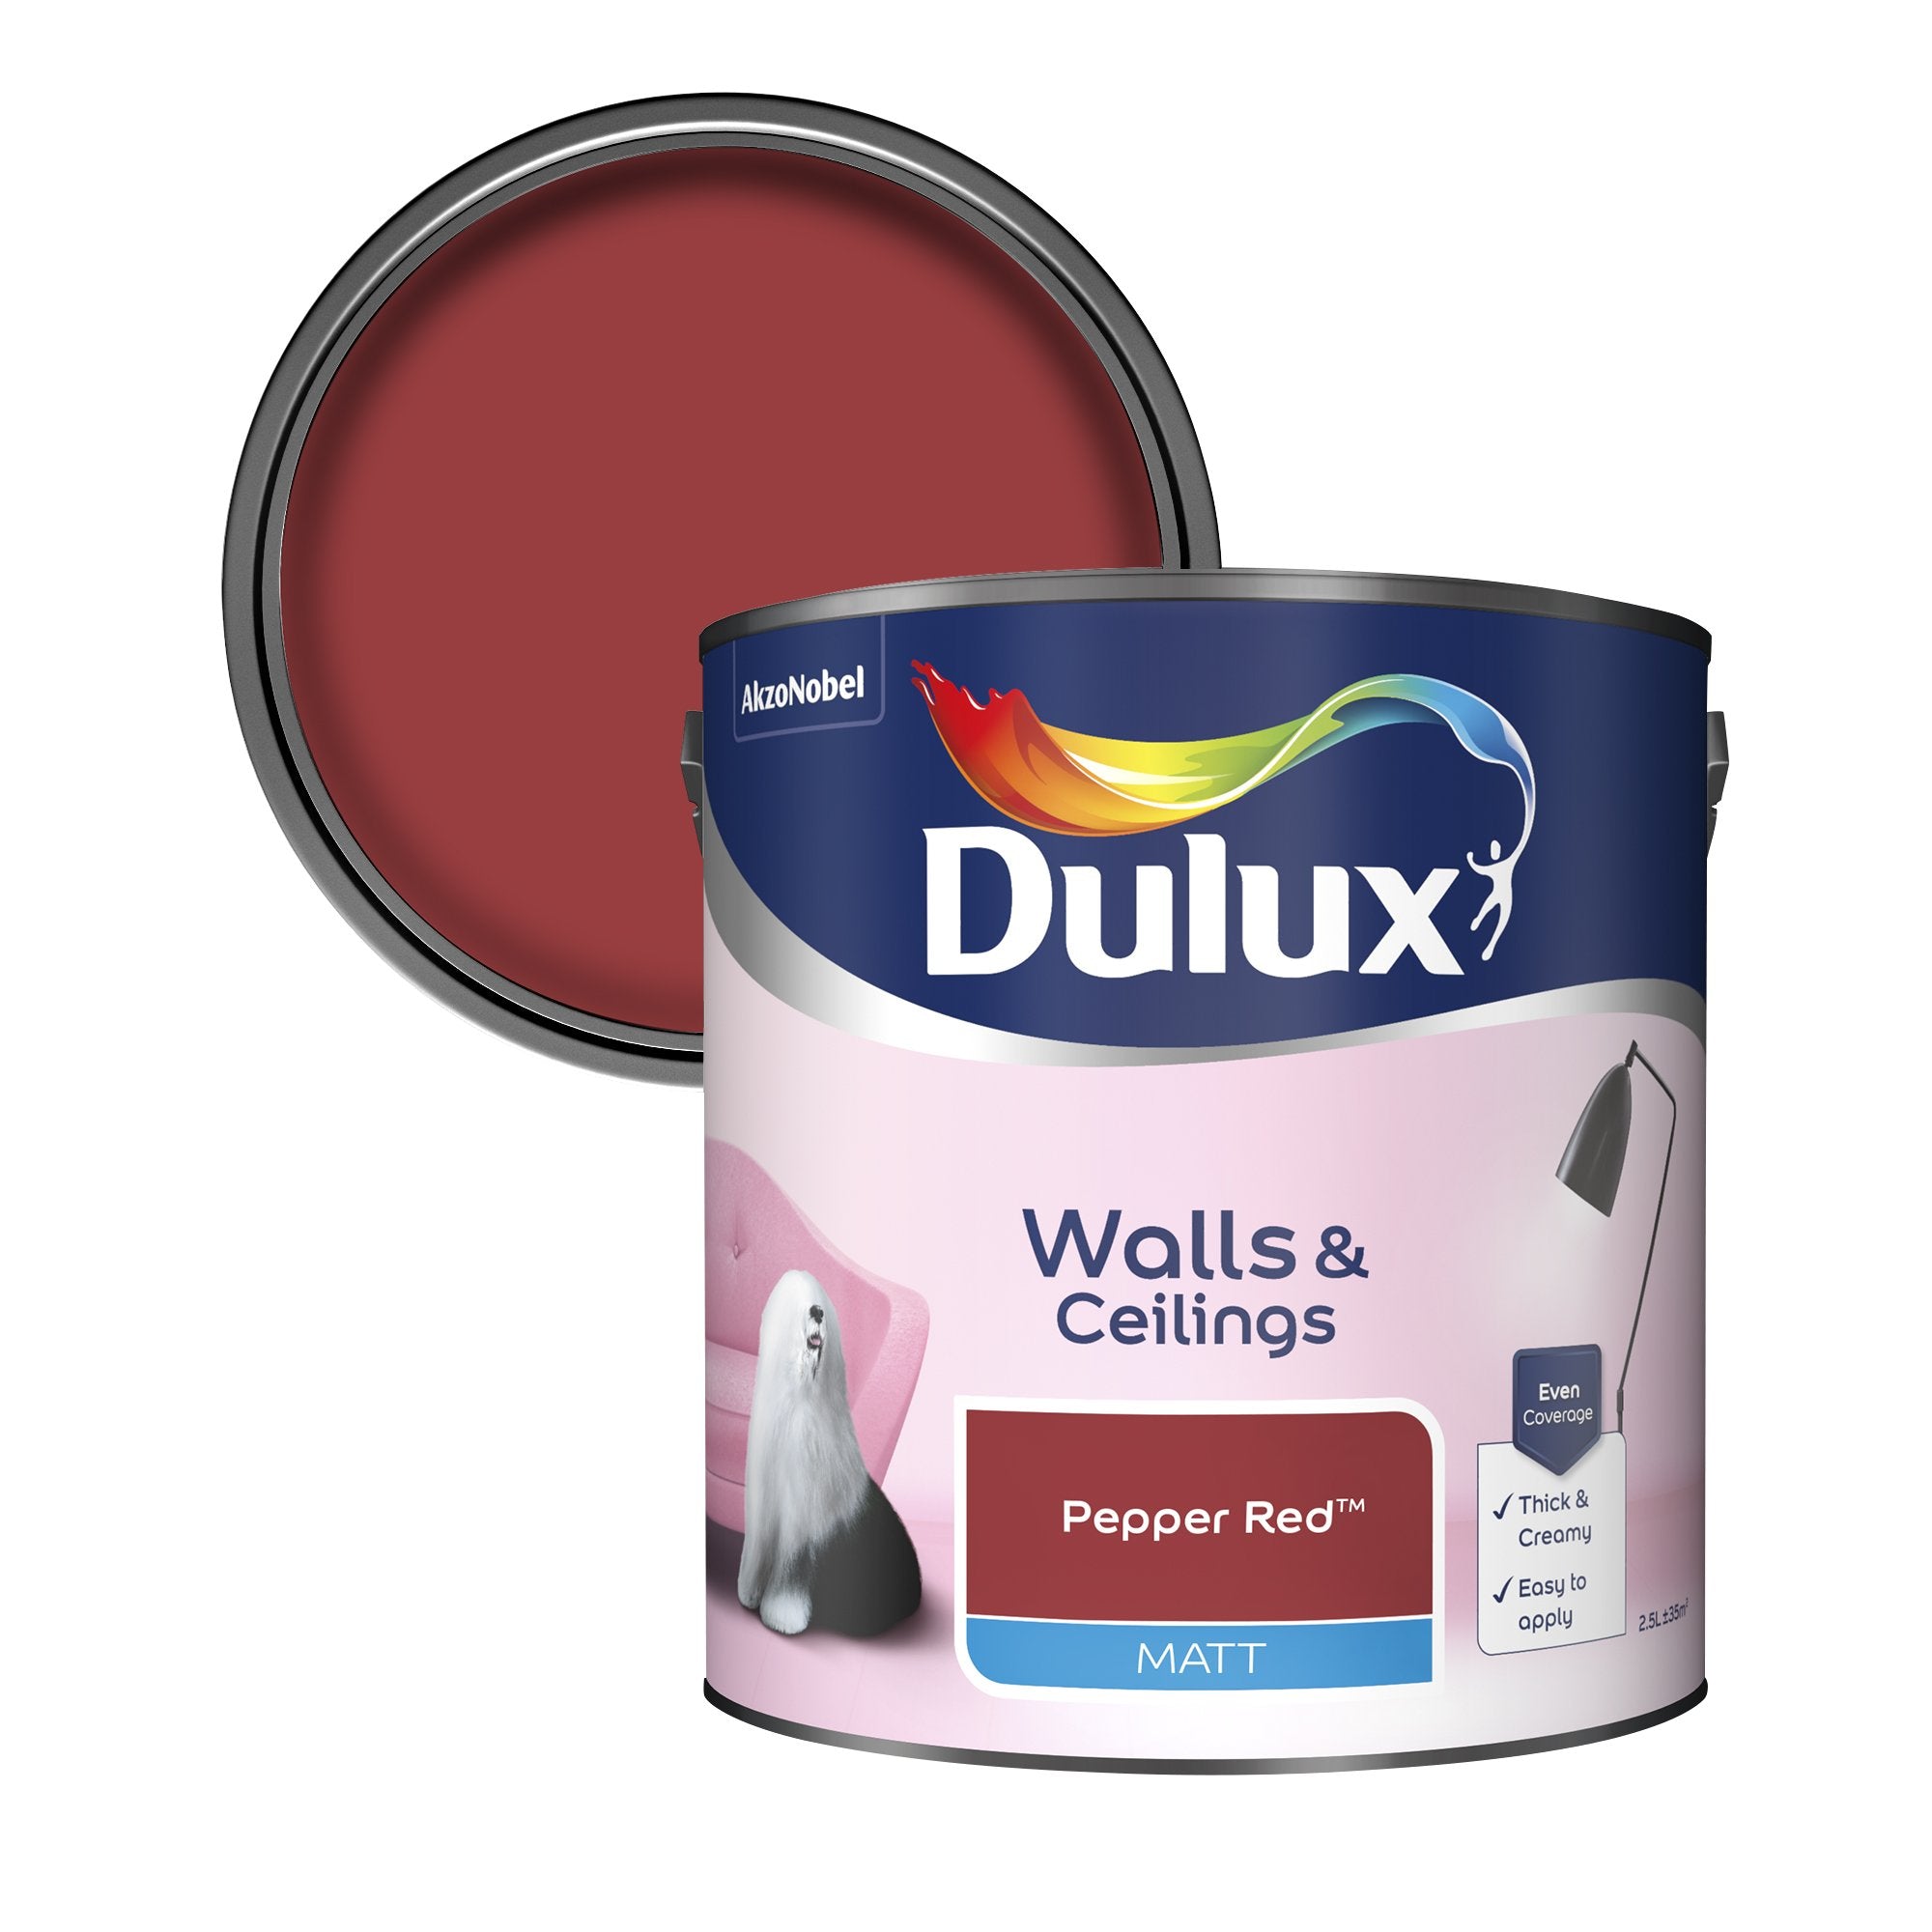 Dulux-Matt-Emulsion-Paint-For-Walls-And-Ceilings-Pepper-Red-2.5L